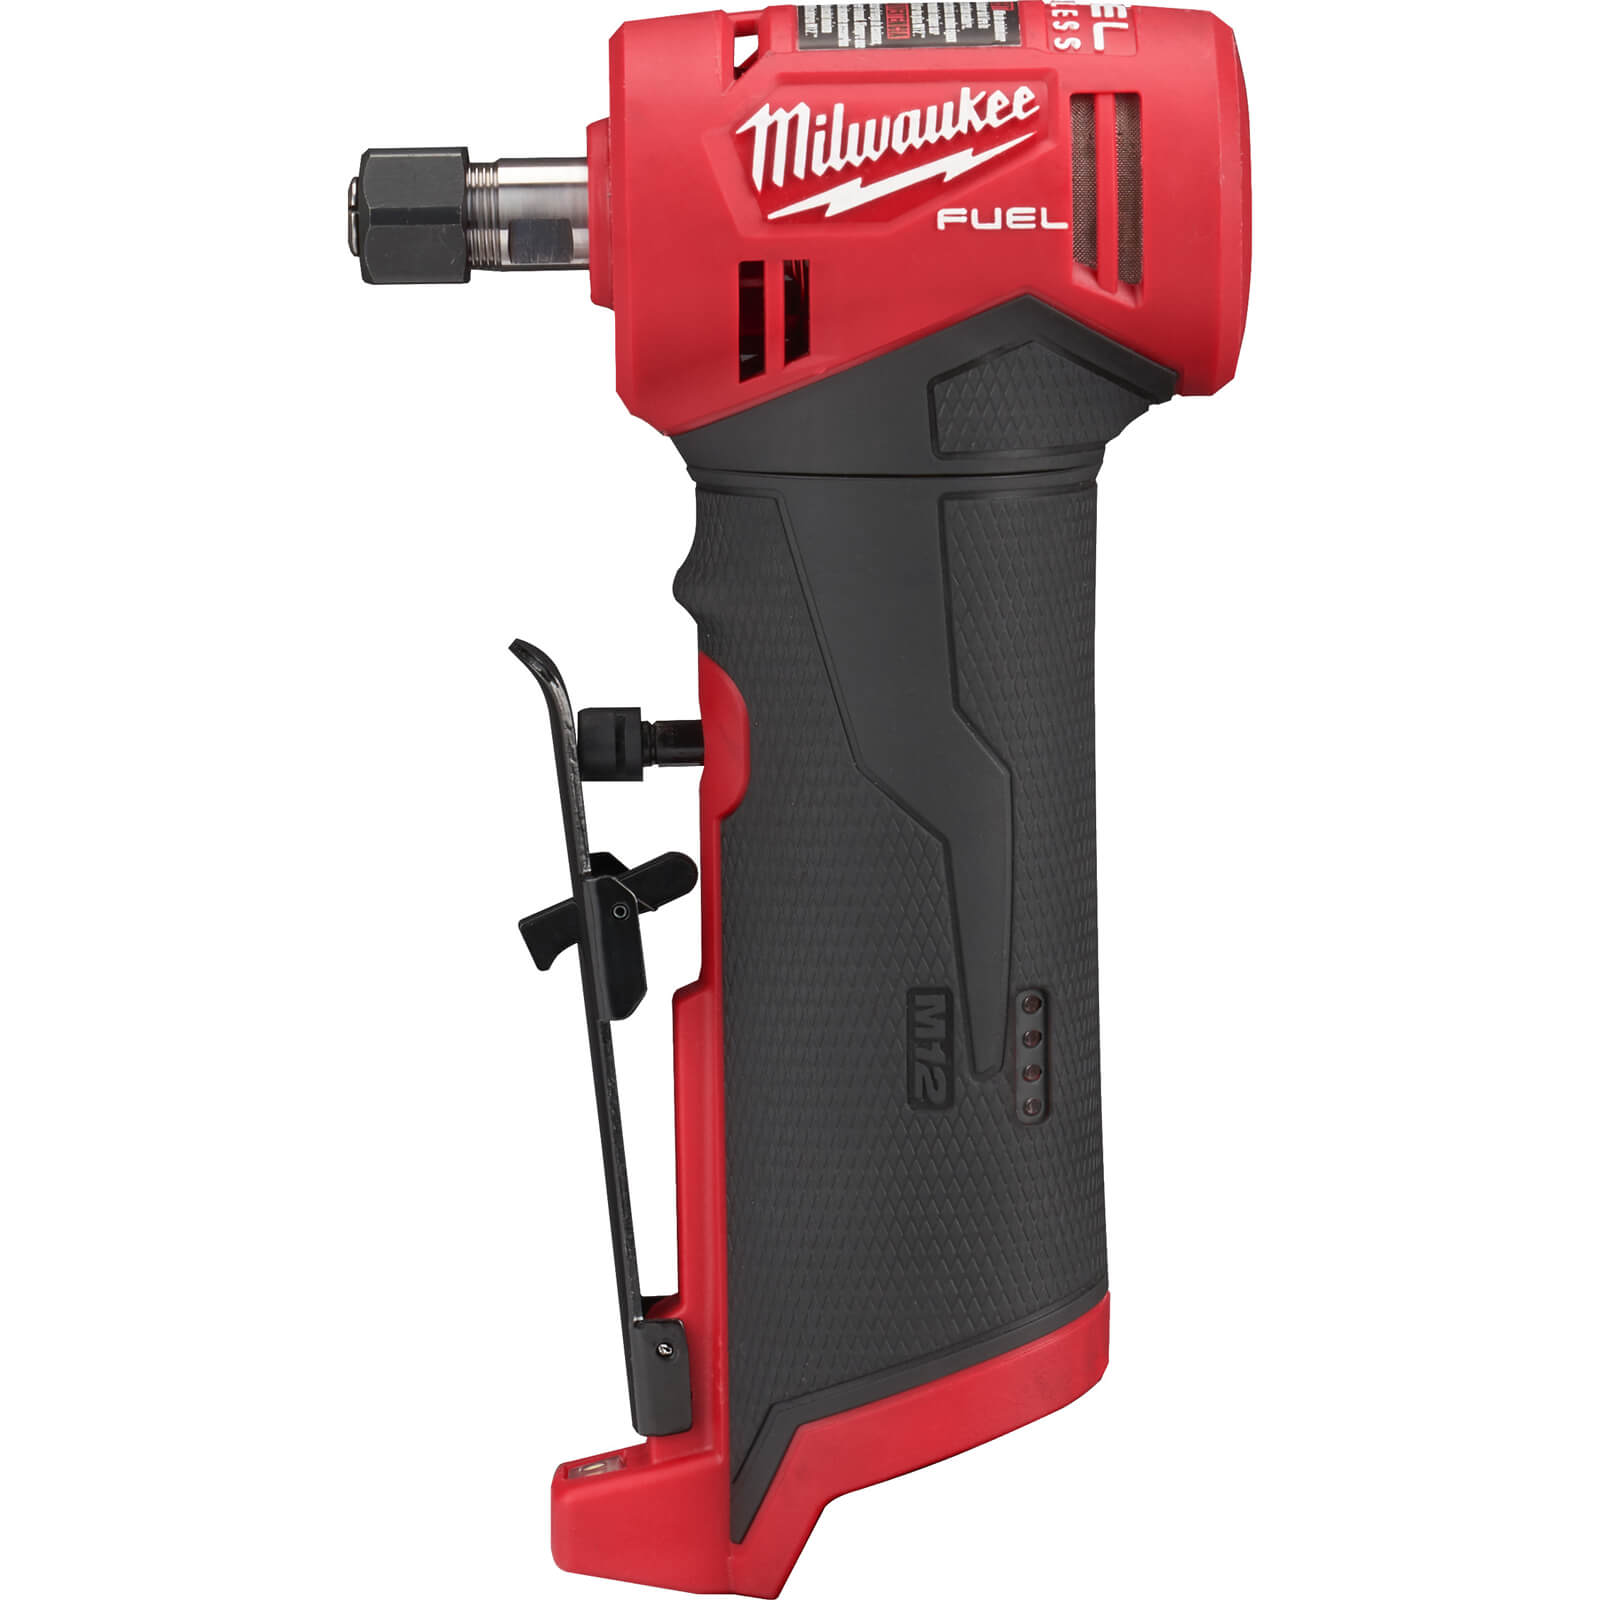 Image of Milwaukee M12 FDGA Fuel 12v Cordless Brushless Angled Die Grinder No Batteries No Charger No Case